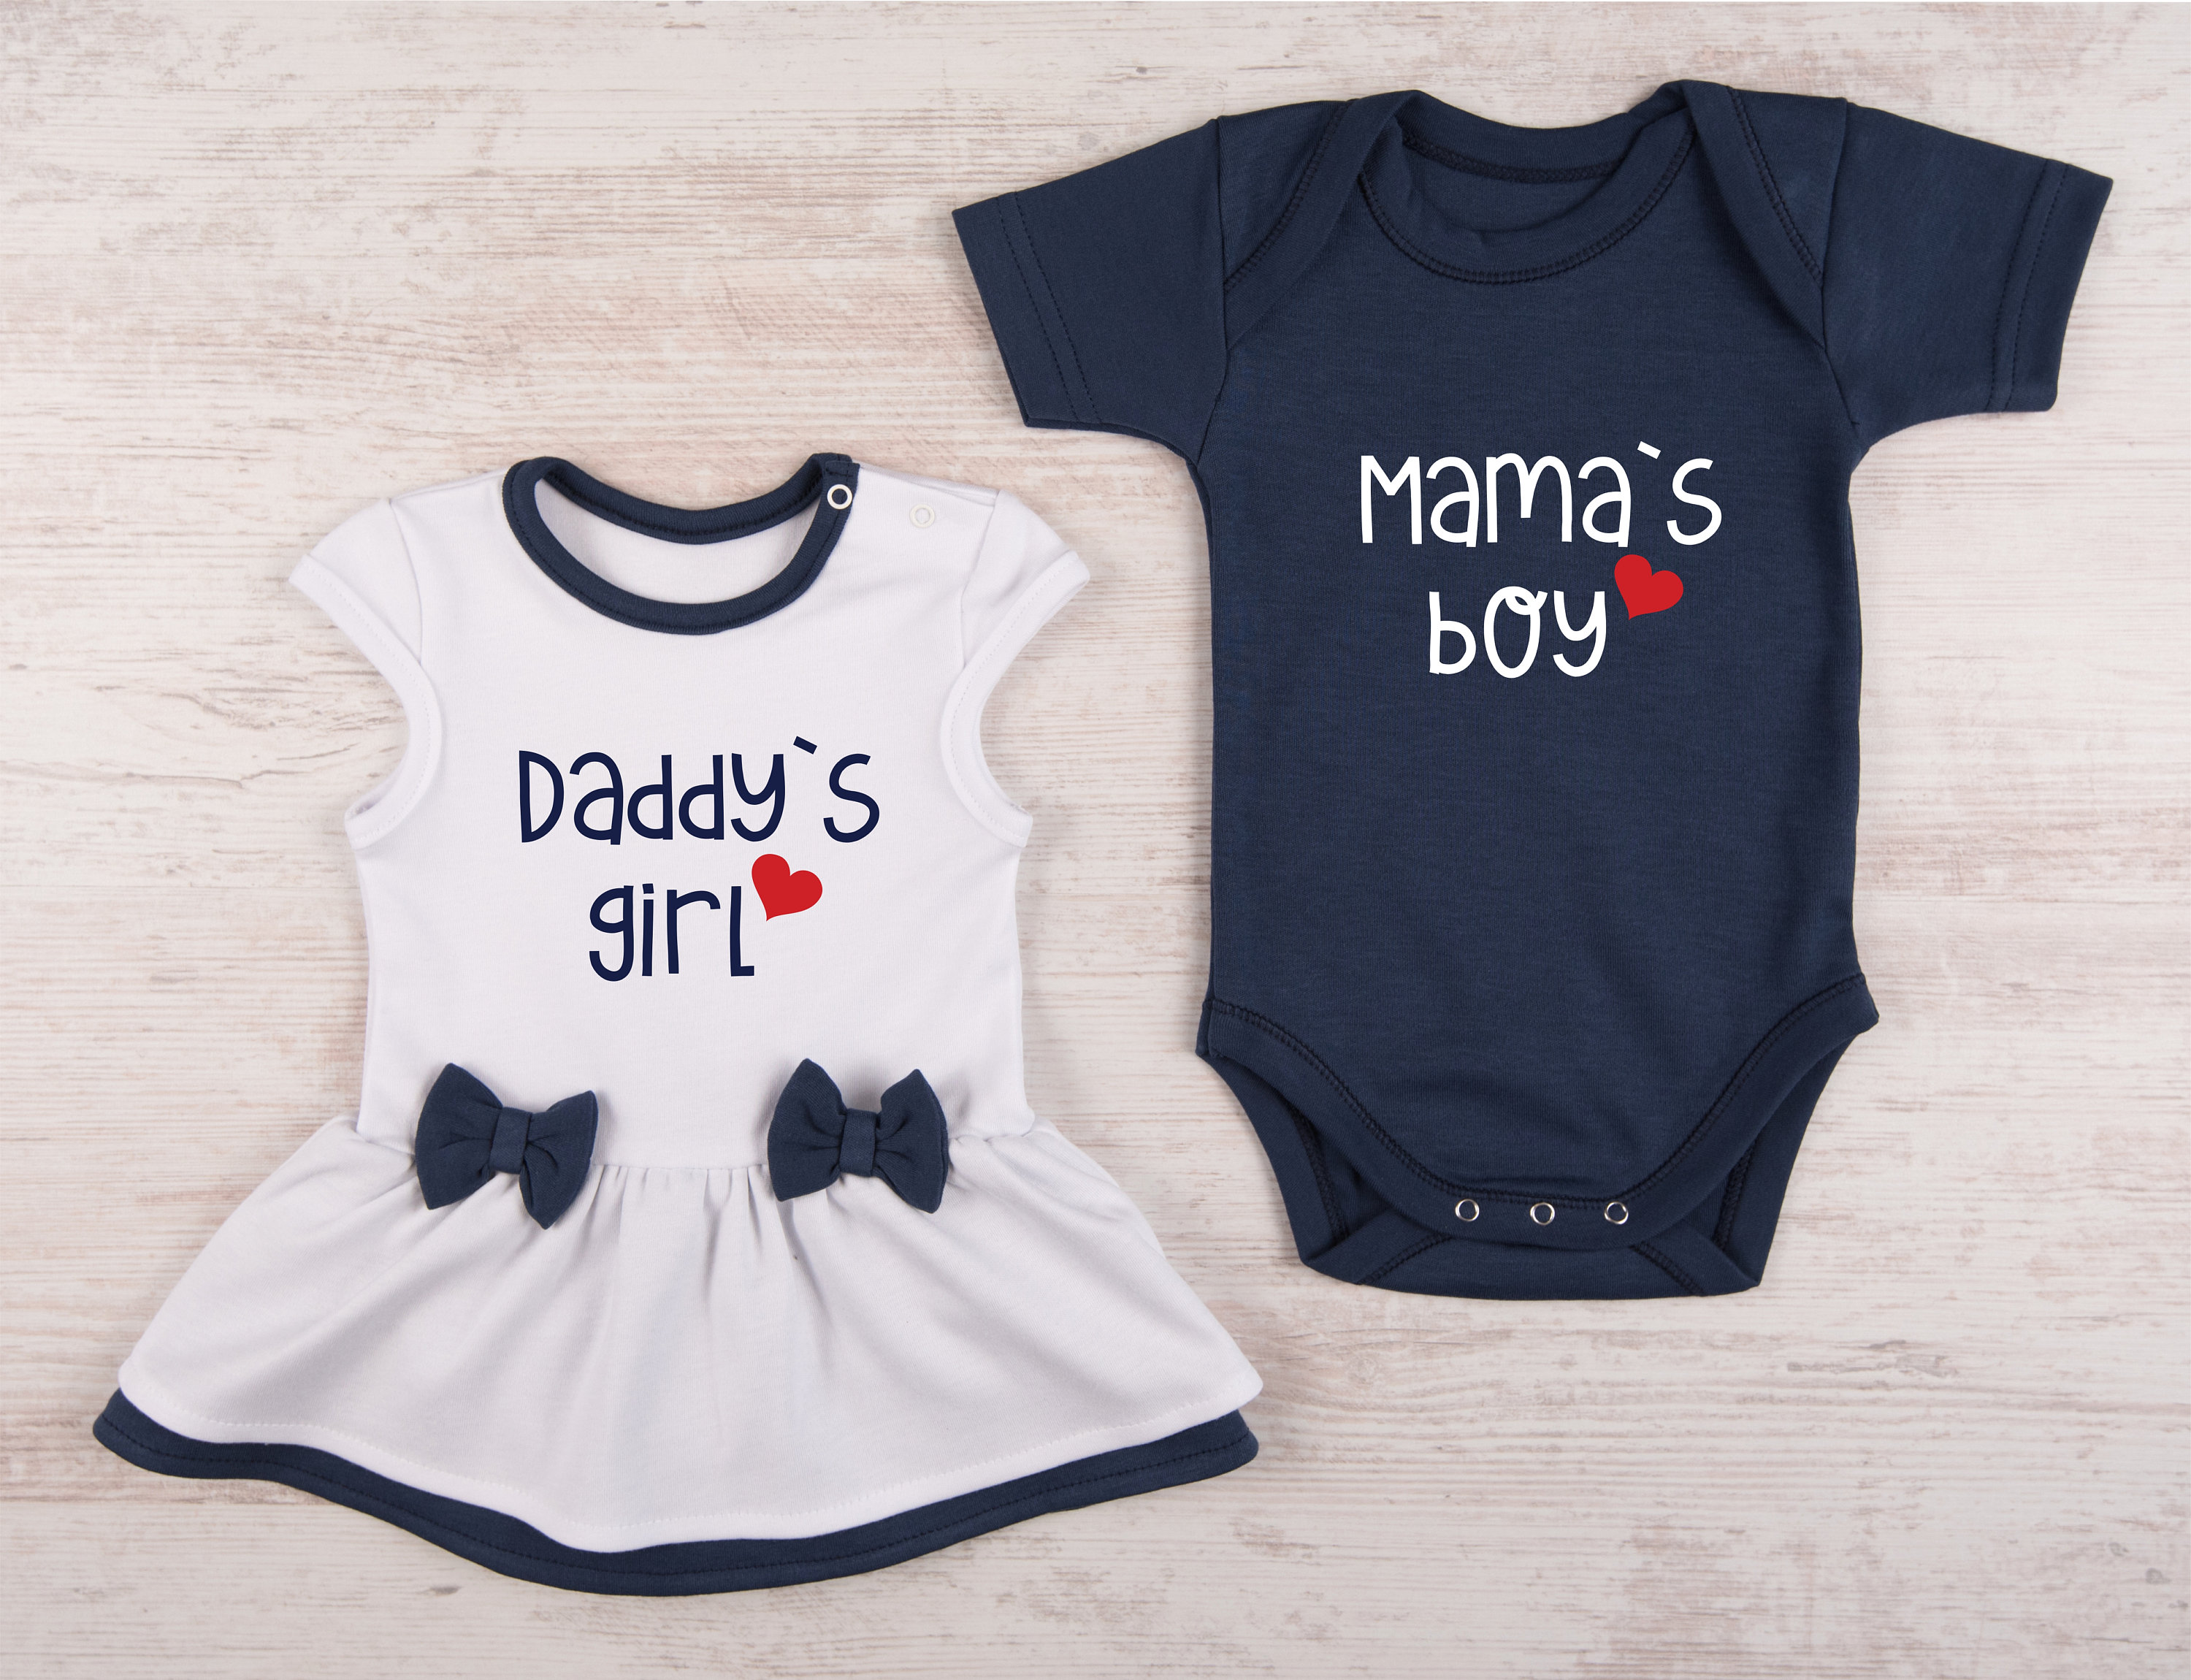 Boy Girl Twin Matching Outfits - Etsy